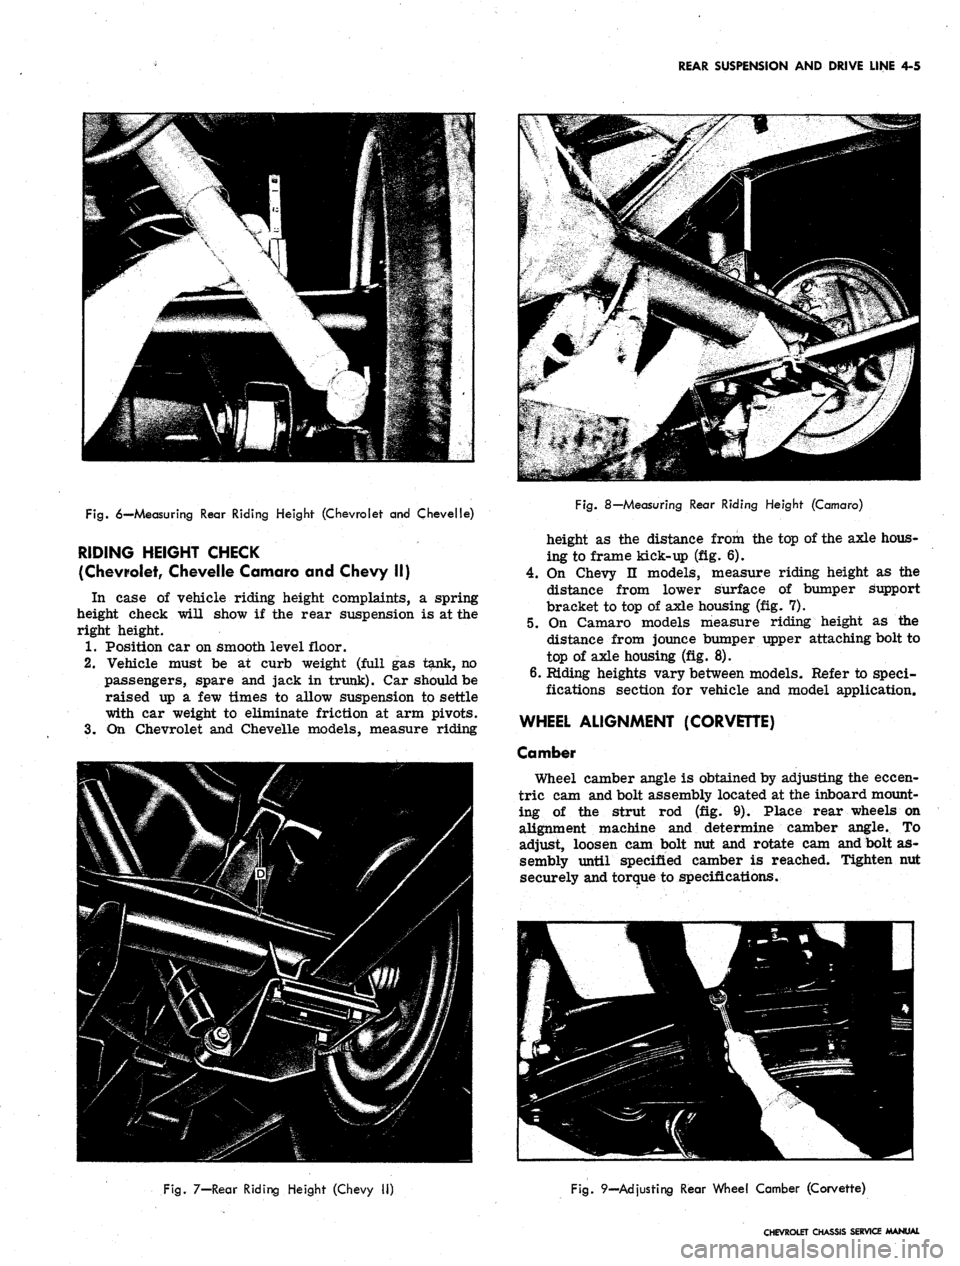 CHEVROLET CAMARO 1967 1.G Chassis Workshop Manual 
REAR SUSPENSION AND DRIVE LINE 4-5

Fig.
 6—Measuring Rear Riding Height (Chevrolet and Chevelle)

RIDING HEIGHT CHECK

(Chevrolet, Chevelle Camaro and Chevy II)

In case of vehicle riding height c